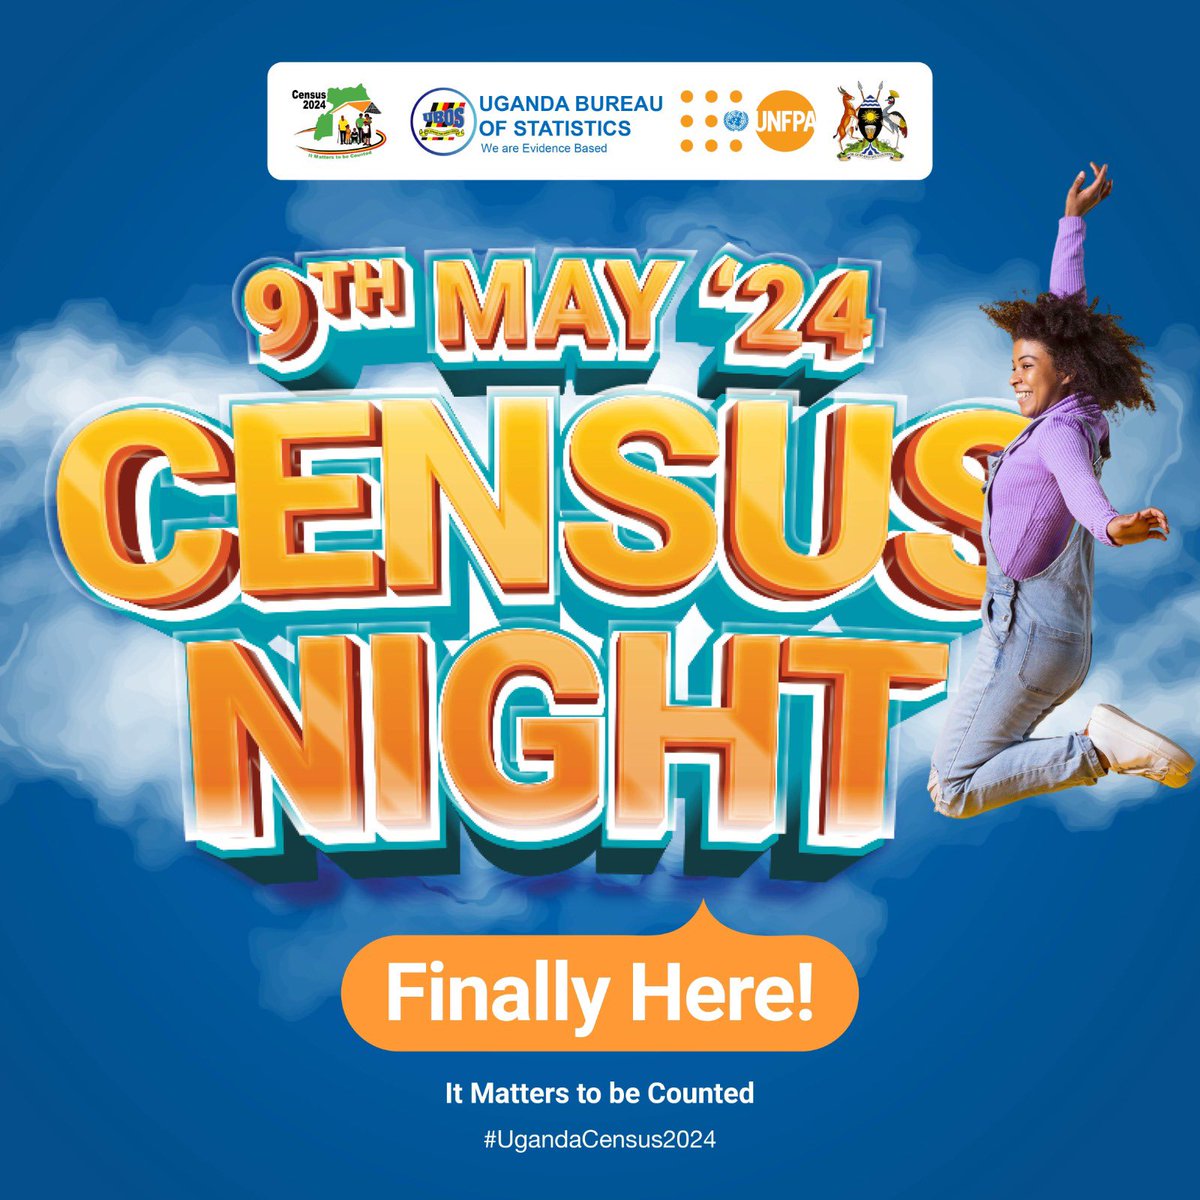 Tonight marks census night in Uganda. Our nation's future lies in our hands. Wherever you are at midnight will be your reference point for the enumeration. Our participation tonight will shape the path forward for Uganda. Let's remember it matters to be counted. #UgandaCensus2024